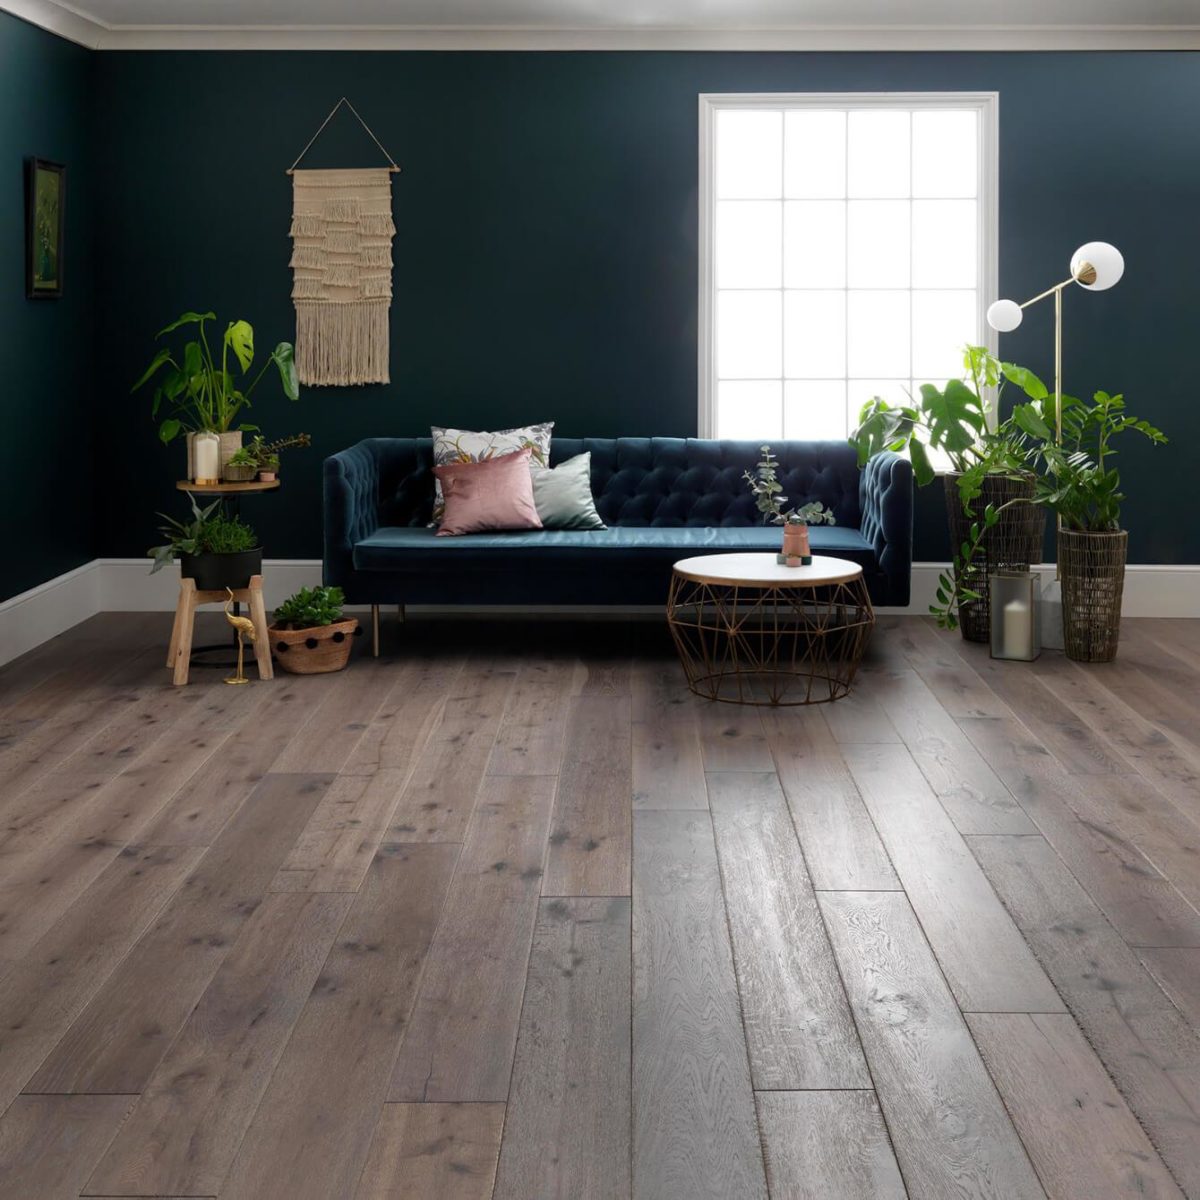 Woodpecker flooring for the home